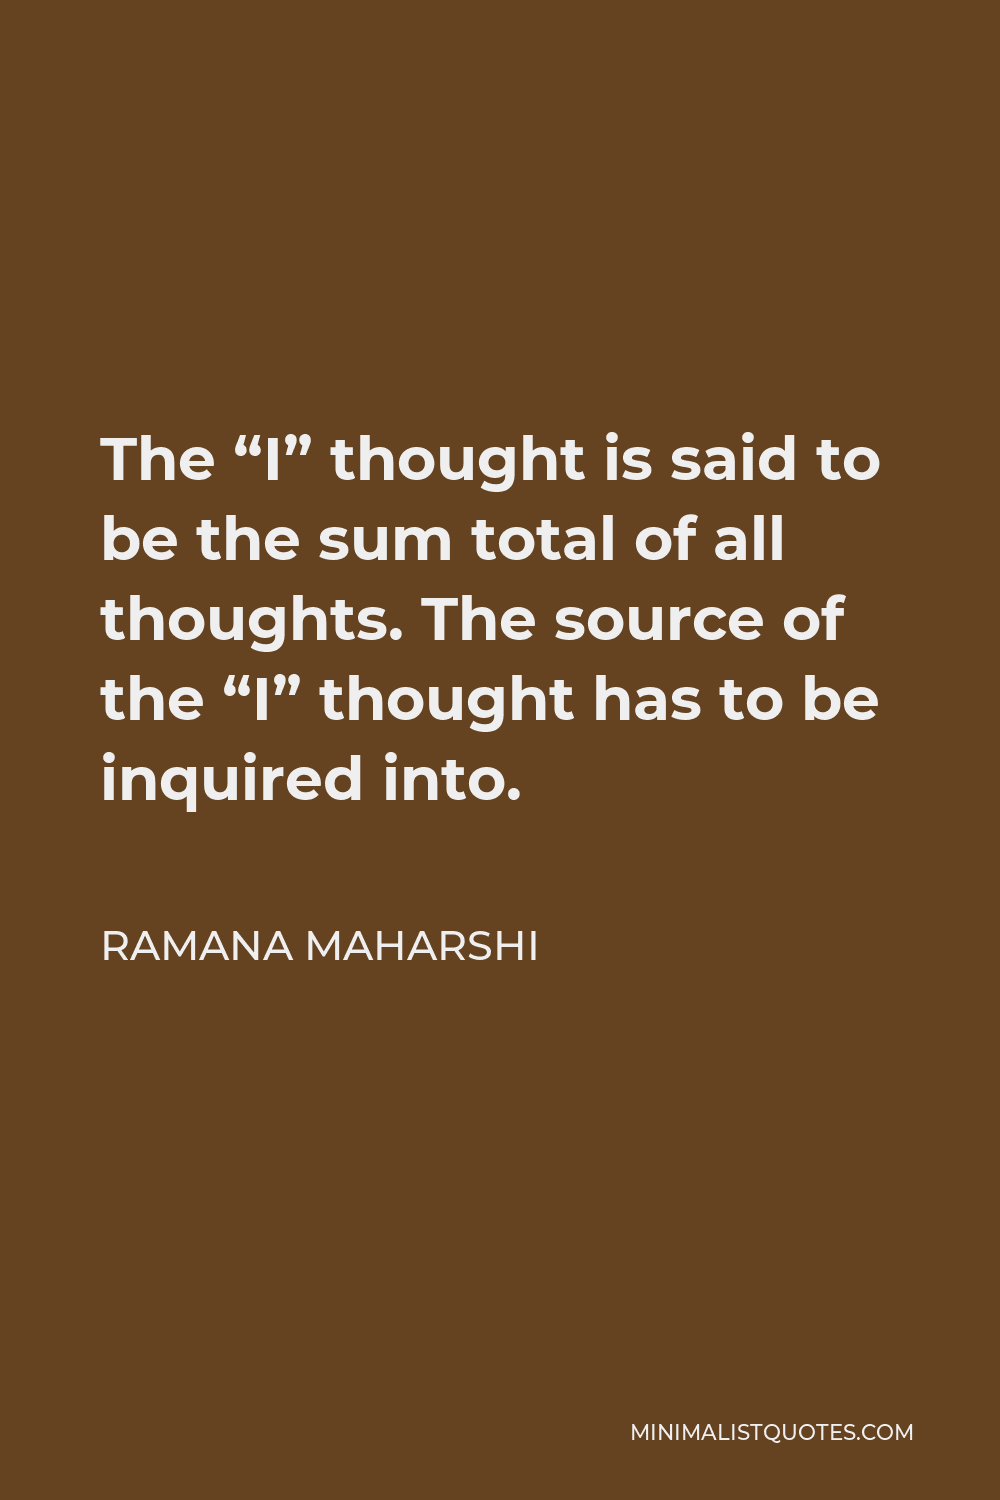 Ramana Maharshi Quote - The “I” thought is said to be the sum total of all thoughts. The source of the “I” thought has to be inquired into.